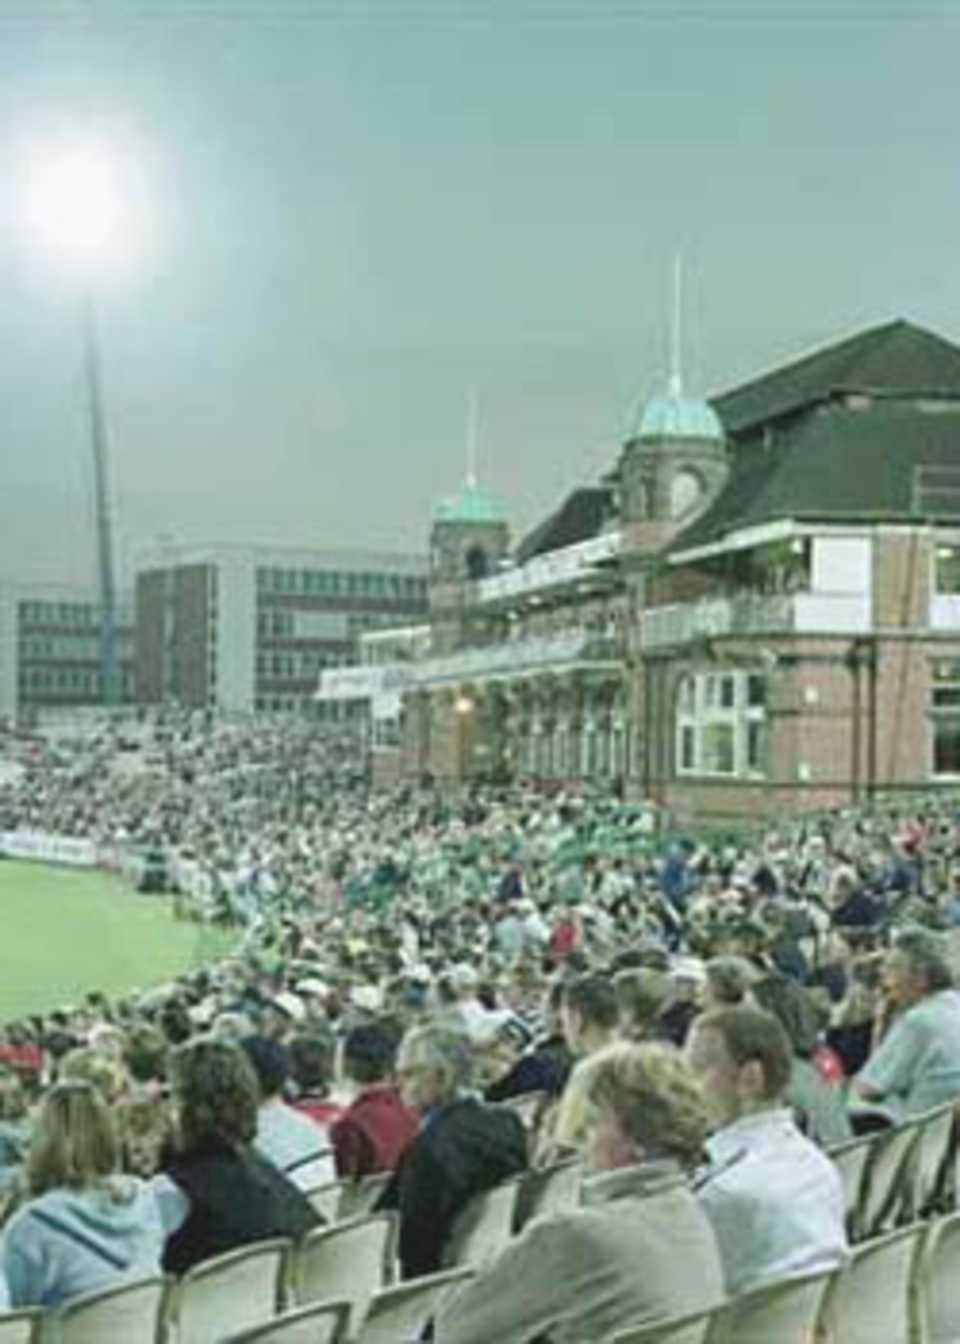 The Old Trafford pavilion basking in the glory of the flood lights, National League Division One, 2000, Lancashire v Yorkshire, Old Trafford, Manchester, 27 June 2000.